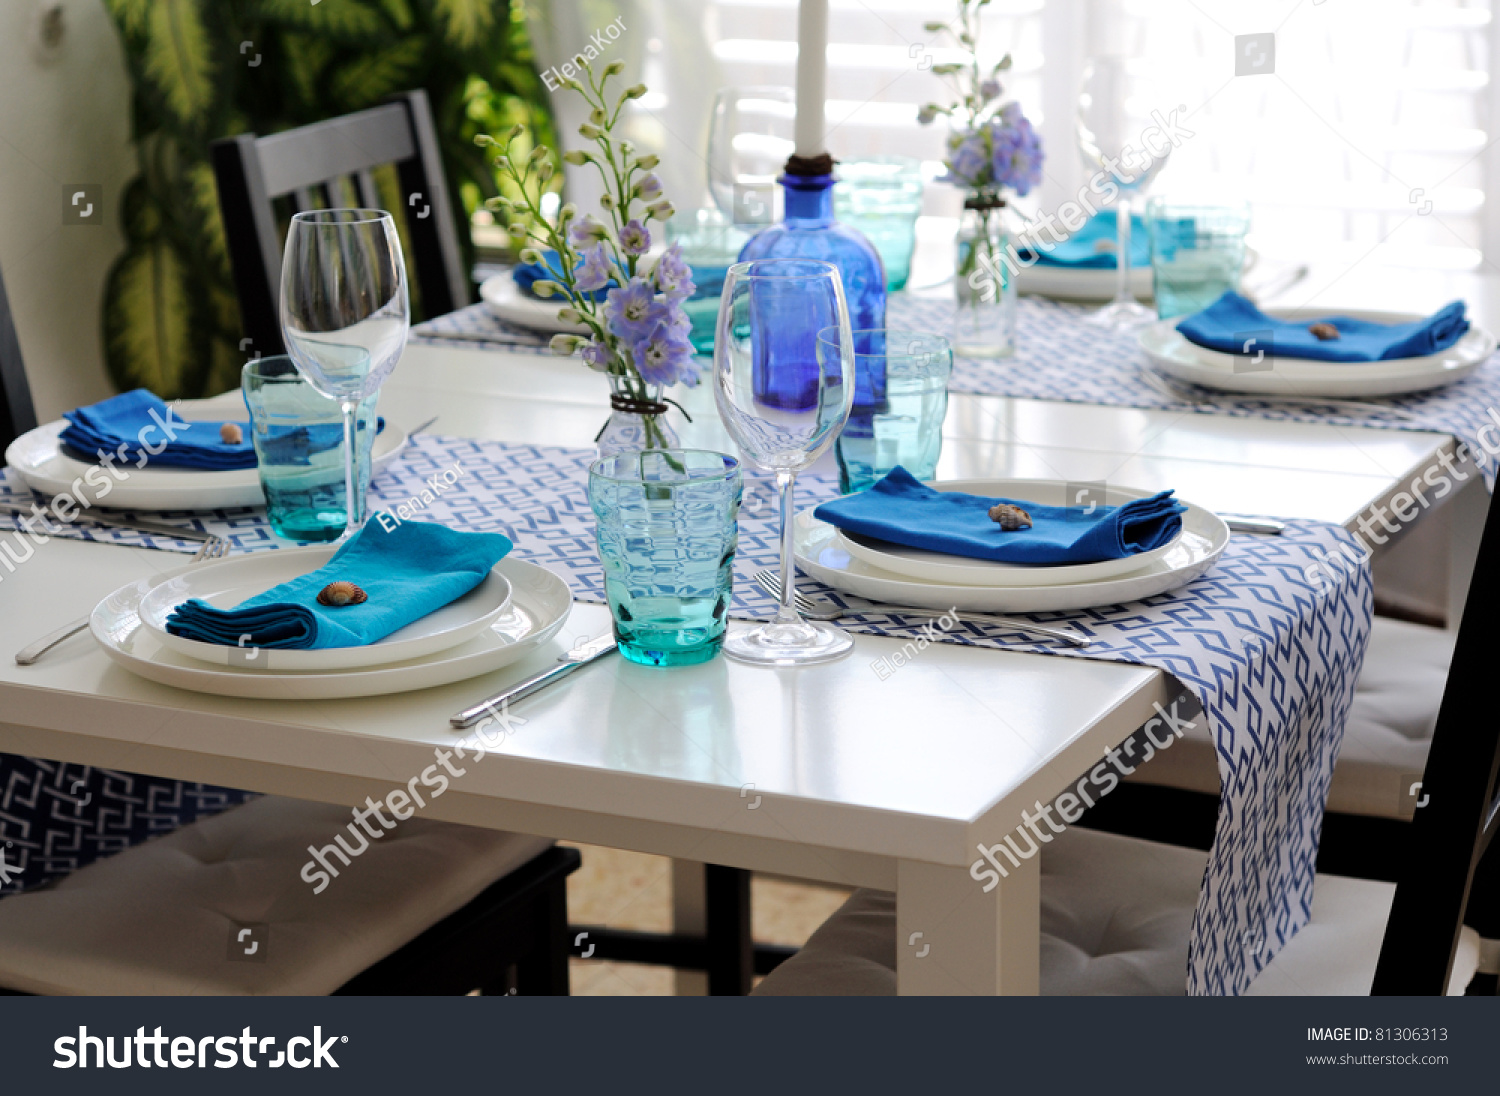 Table Setting In Blue Color Stock Photo 81306313 : Shutterstock